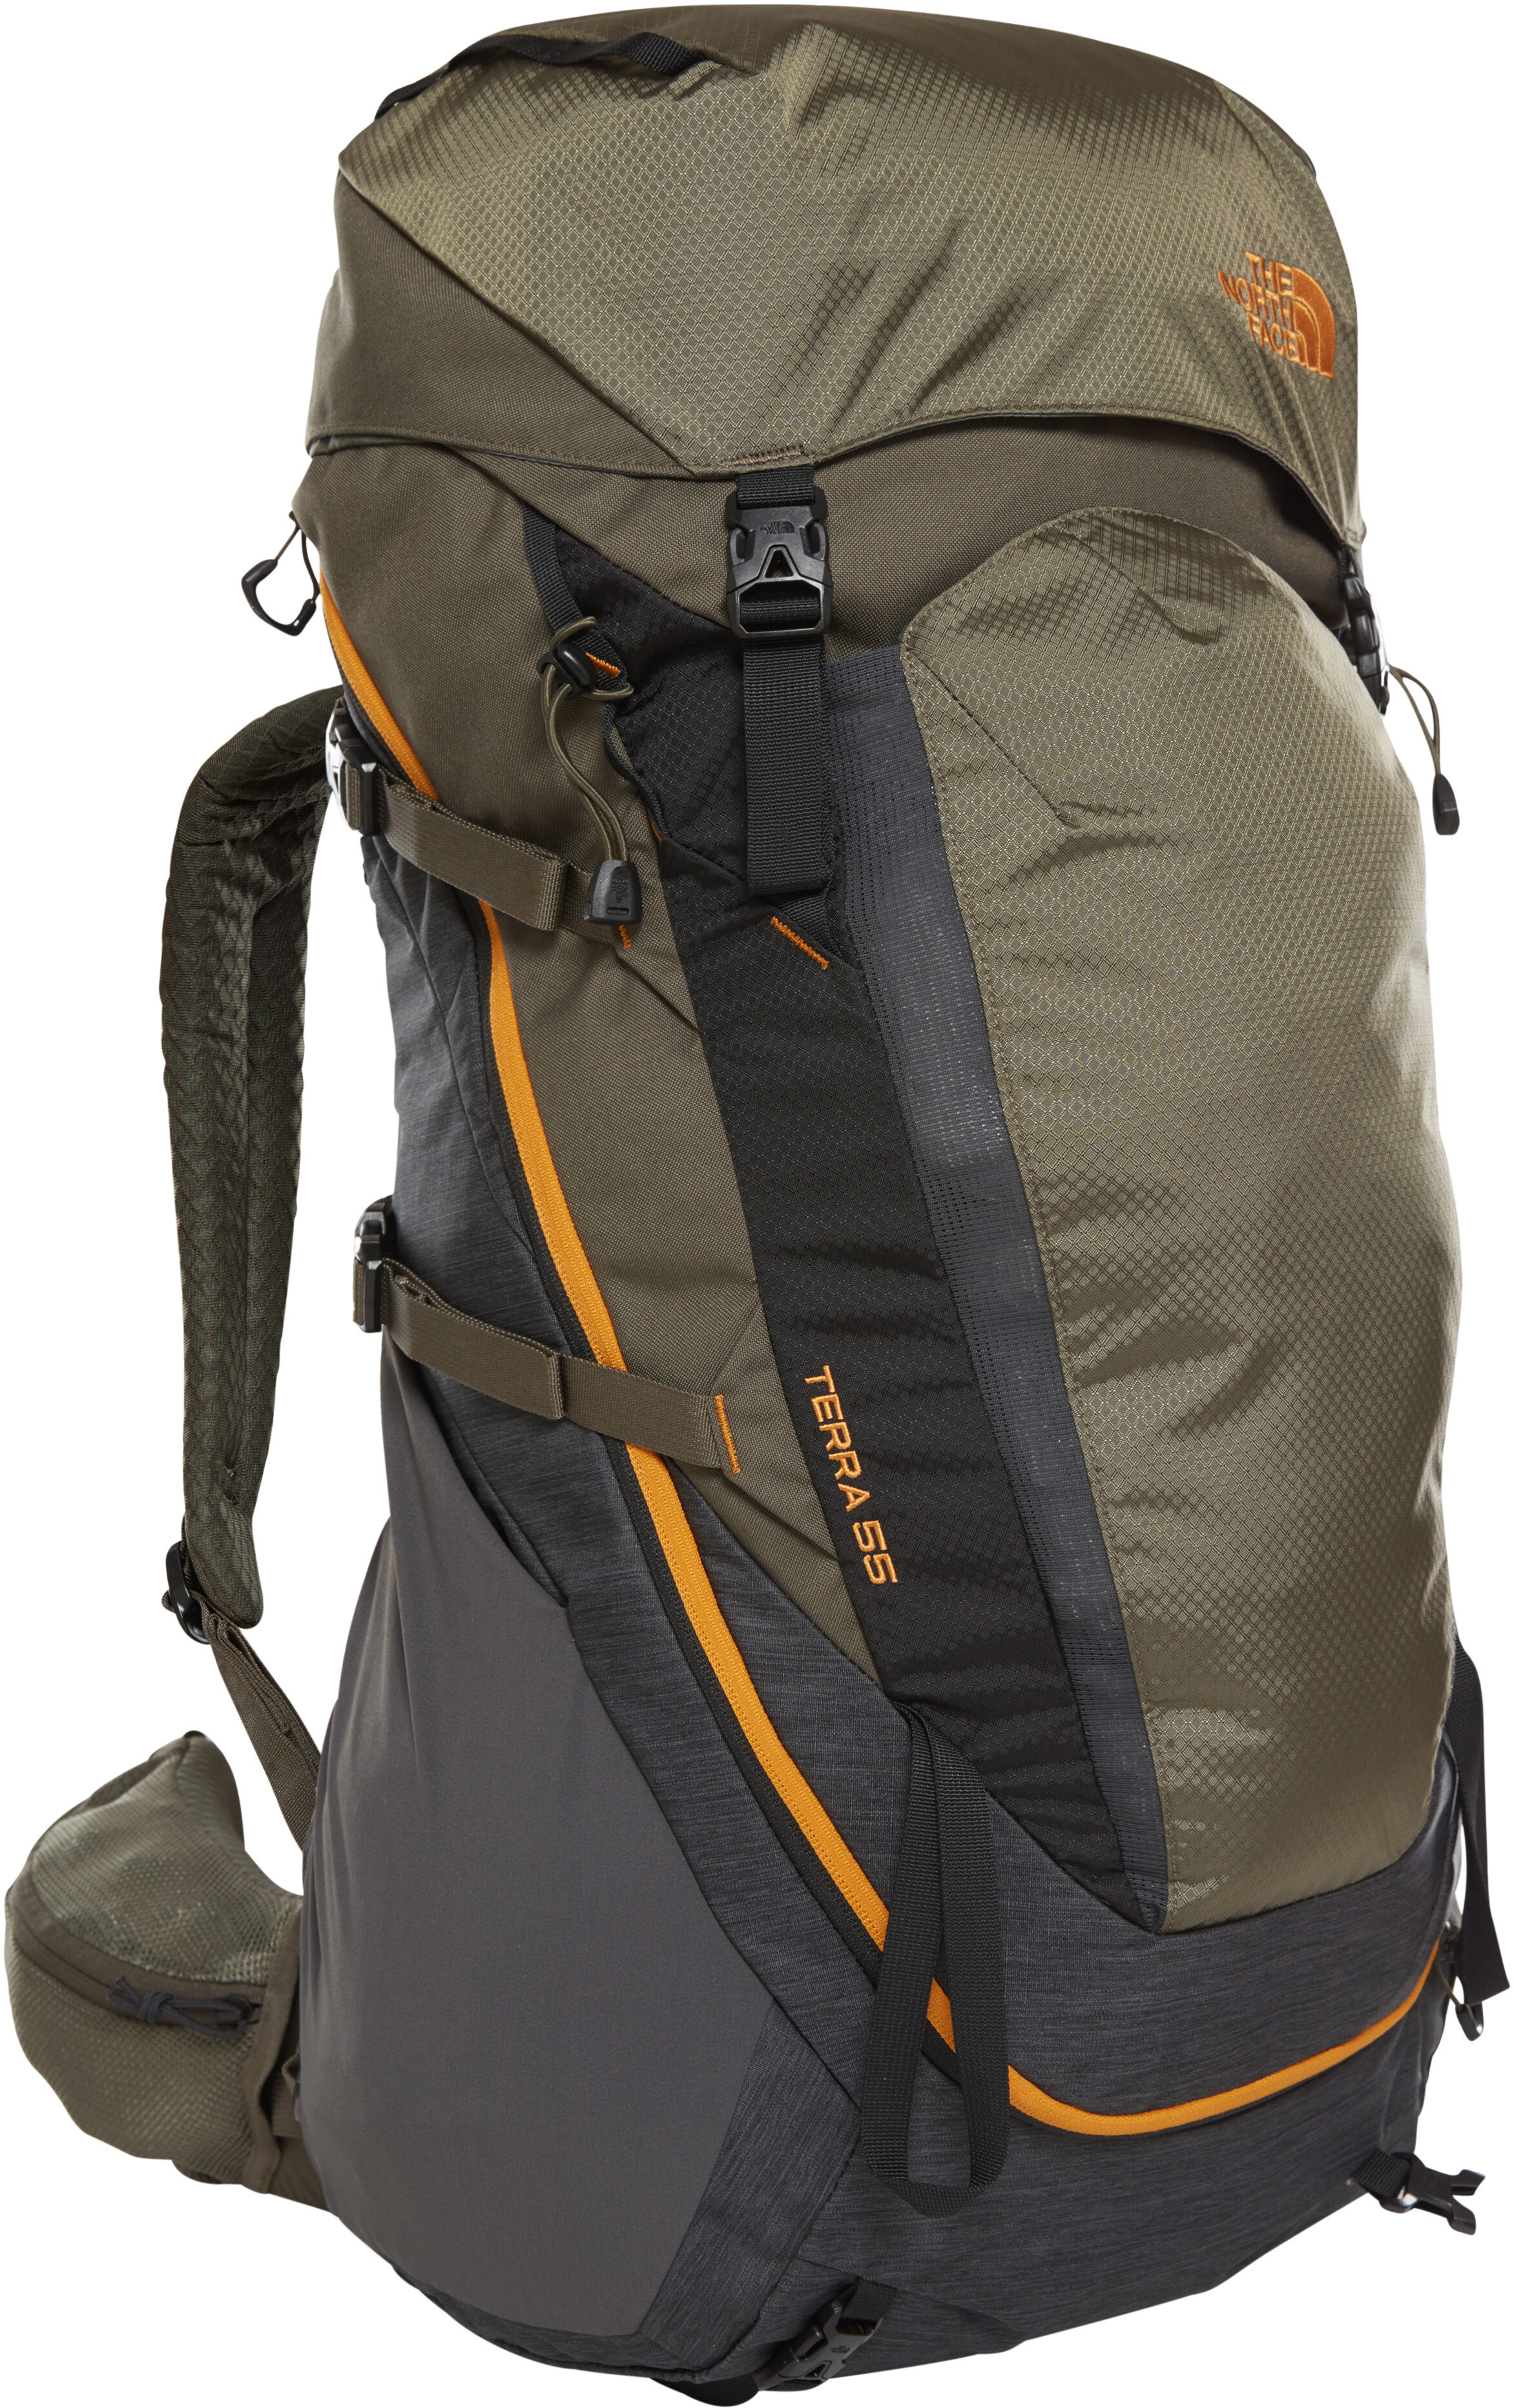 The North Face Terra 55 Backpack tnf dark grey heather/new taupe green